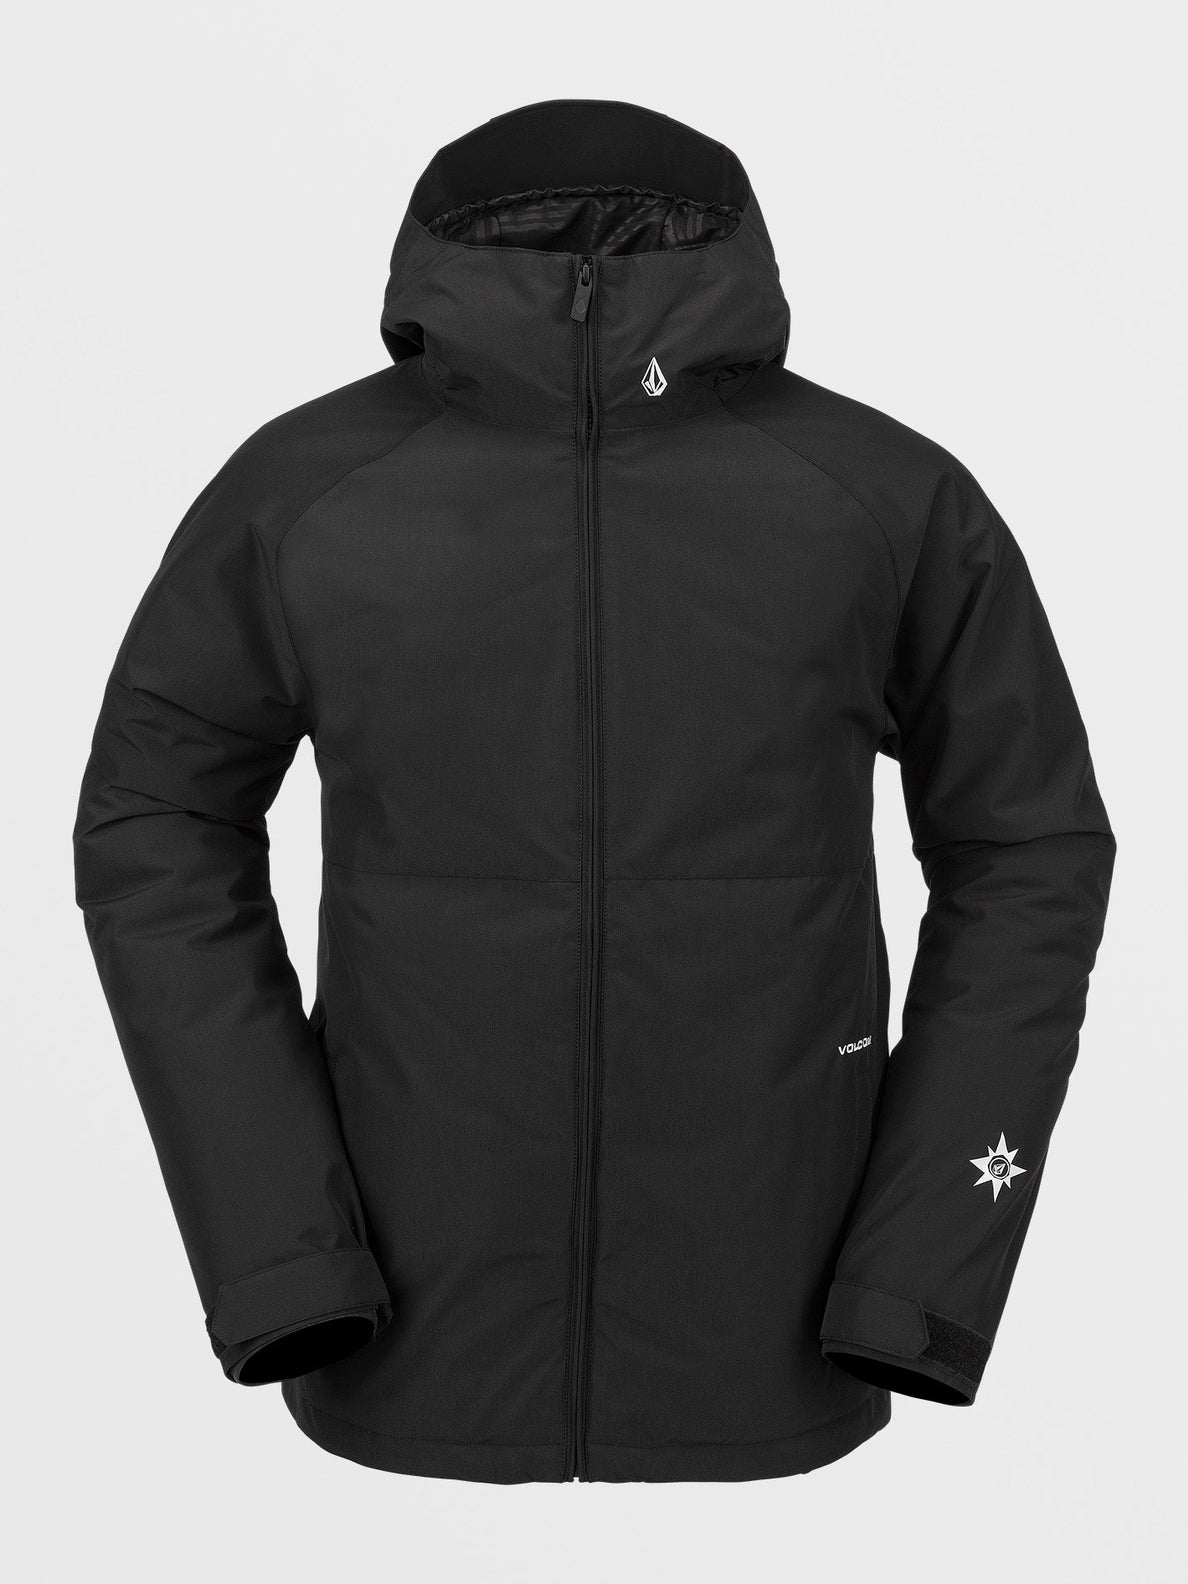 2836 Insulated Jacket - BLACK (G0452408_BLK) [F]